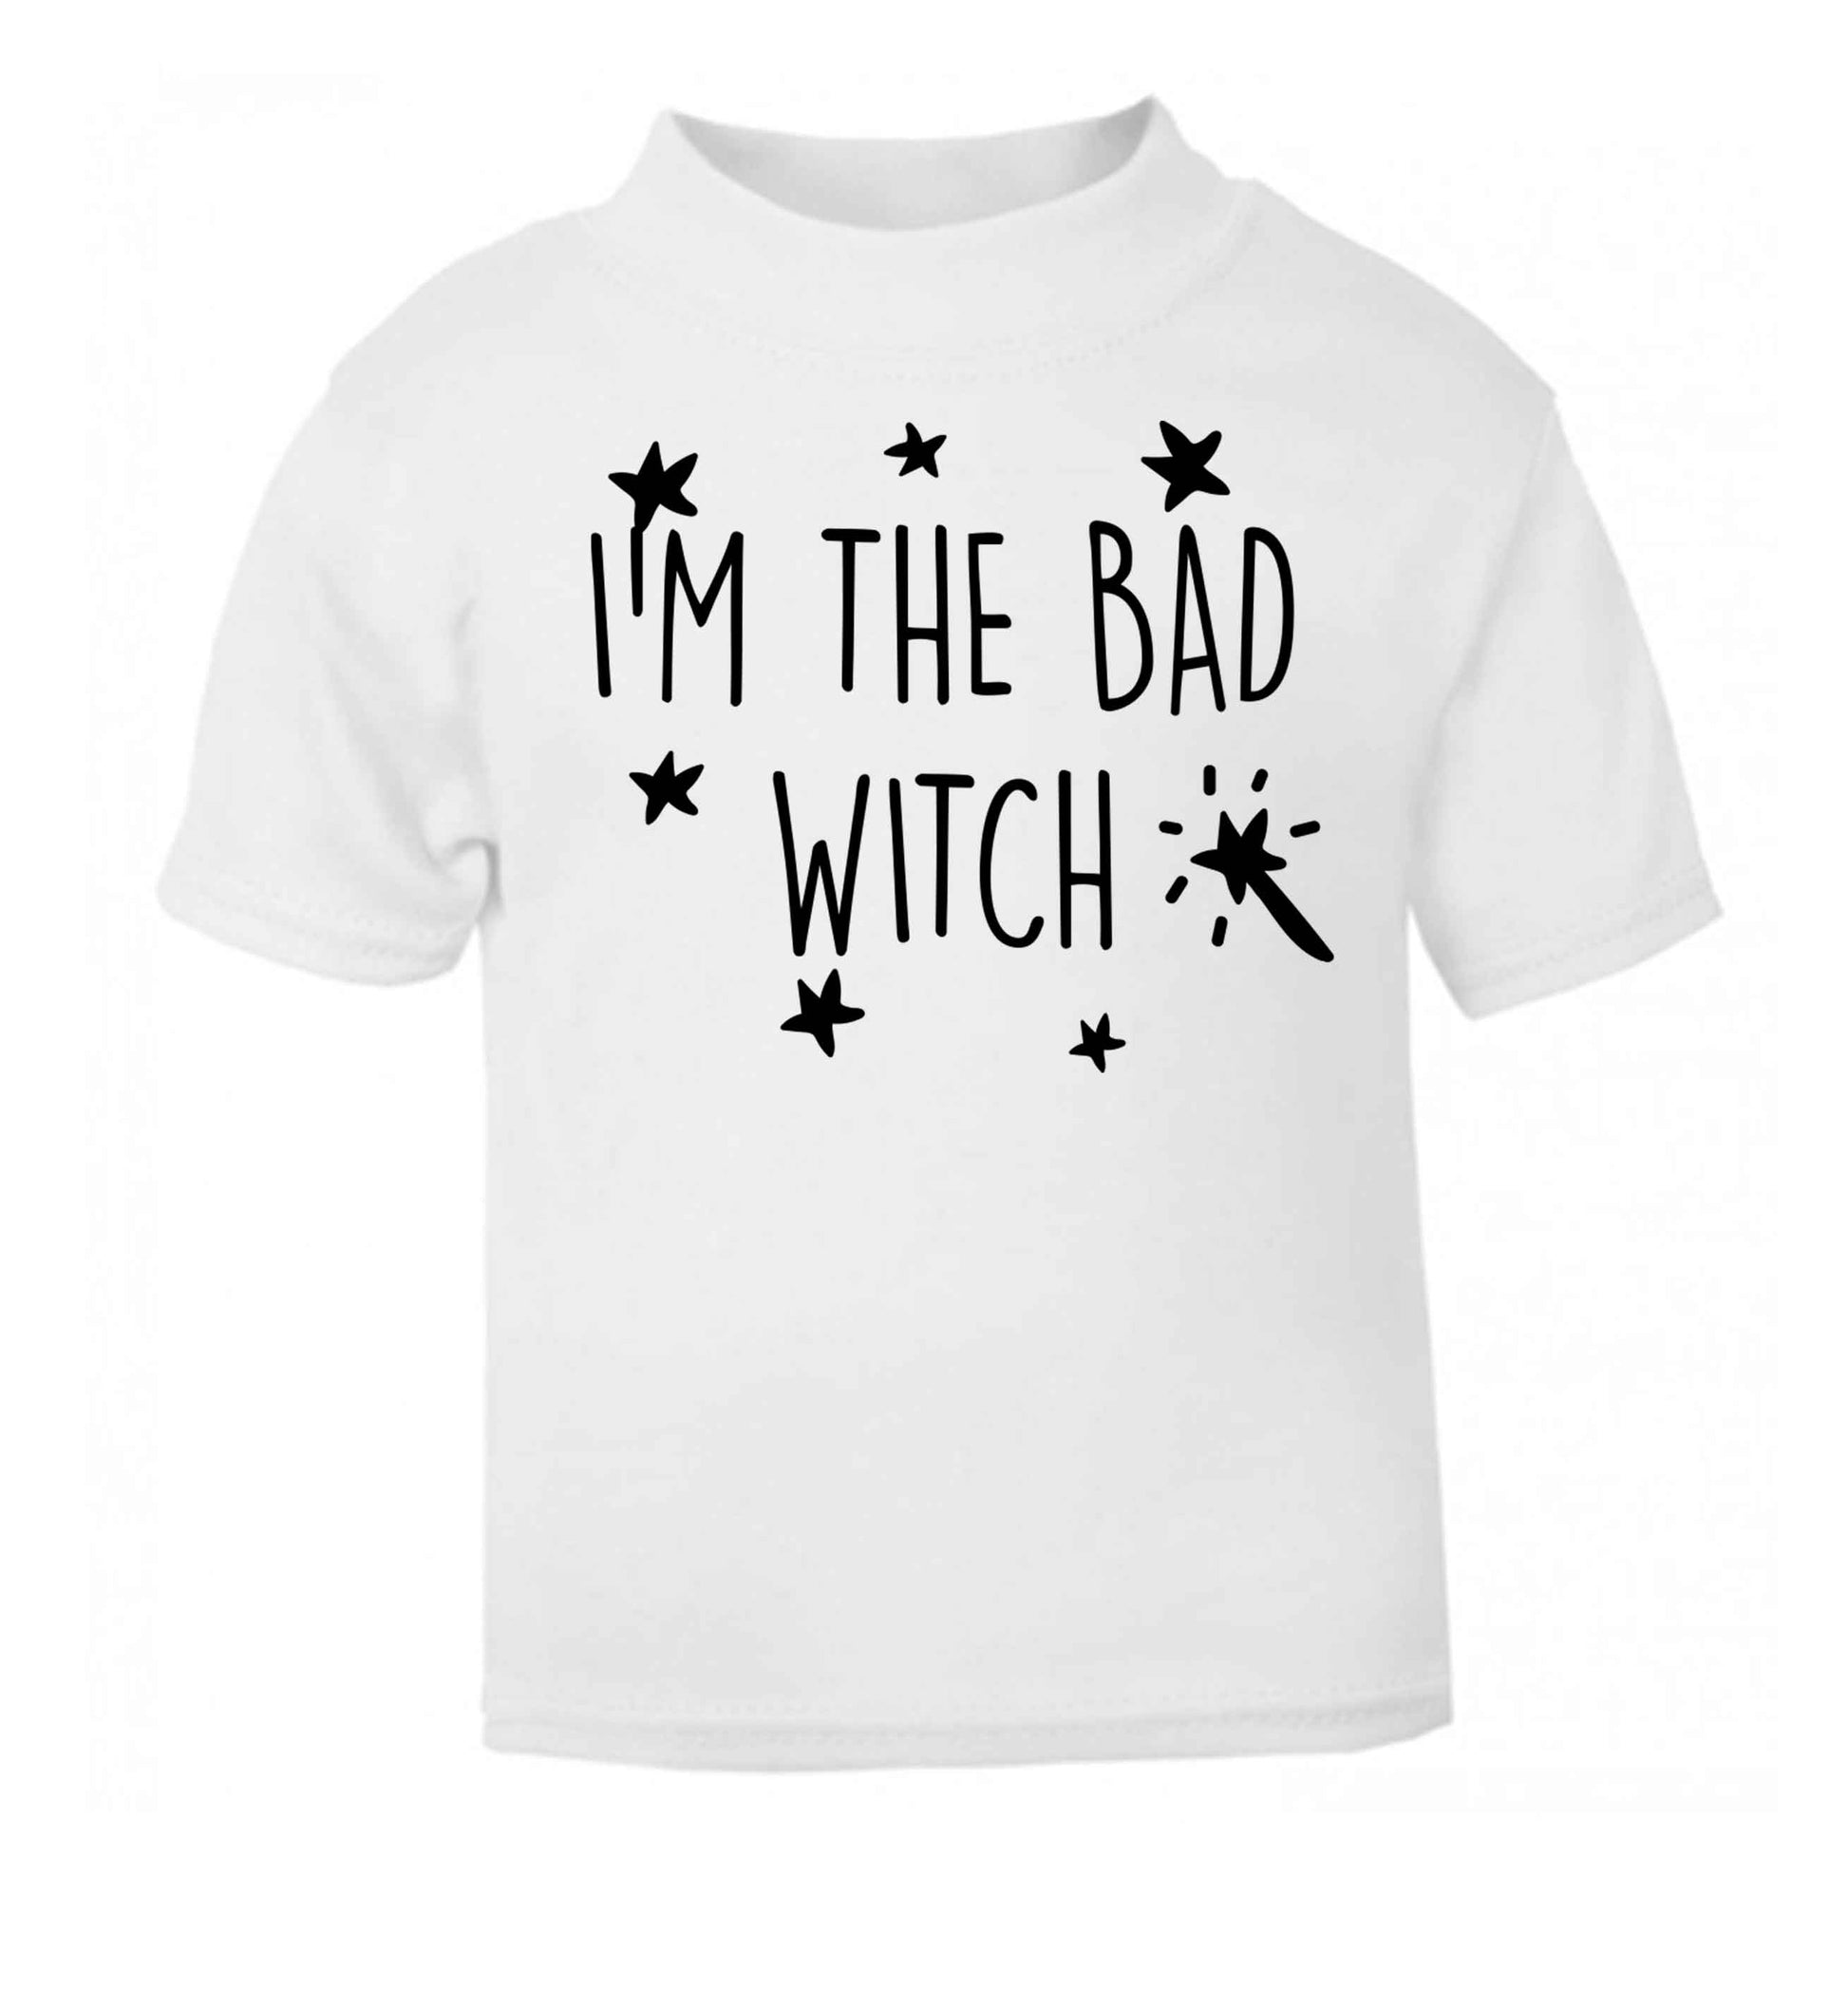 Bad witch white baby toddler Tshirt 2 Years